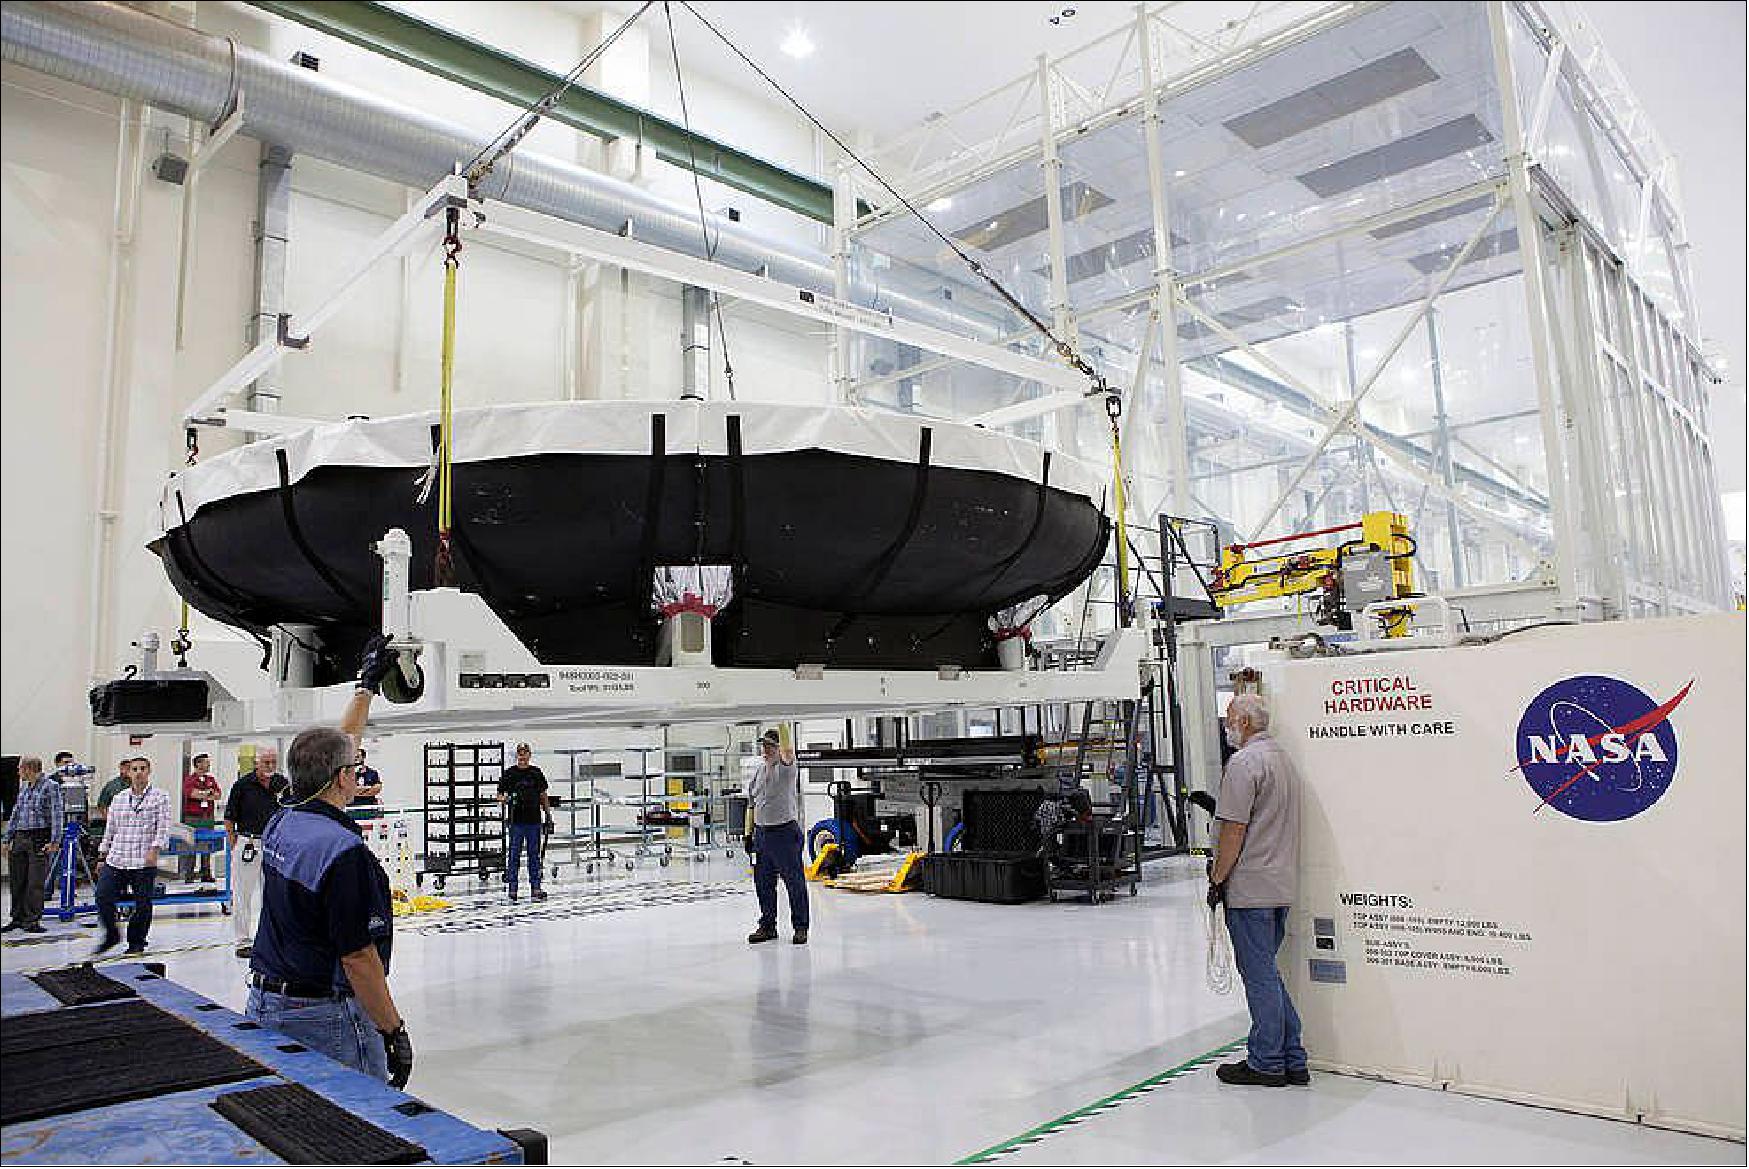 Figure 74: Inside the Neil Armstrong Operations and Checkout Building high bay at NASA’s Kennedy Space Center in Florida, technicians assist as a crane lifts the Orion heat shield for EM-1 away from the base of its shipping container (image credit: NASA, Dimitri Gerondidakis)